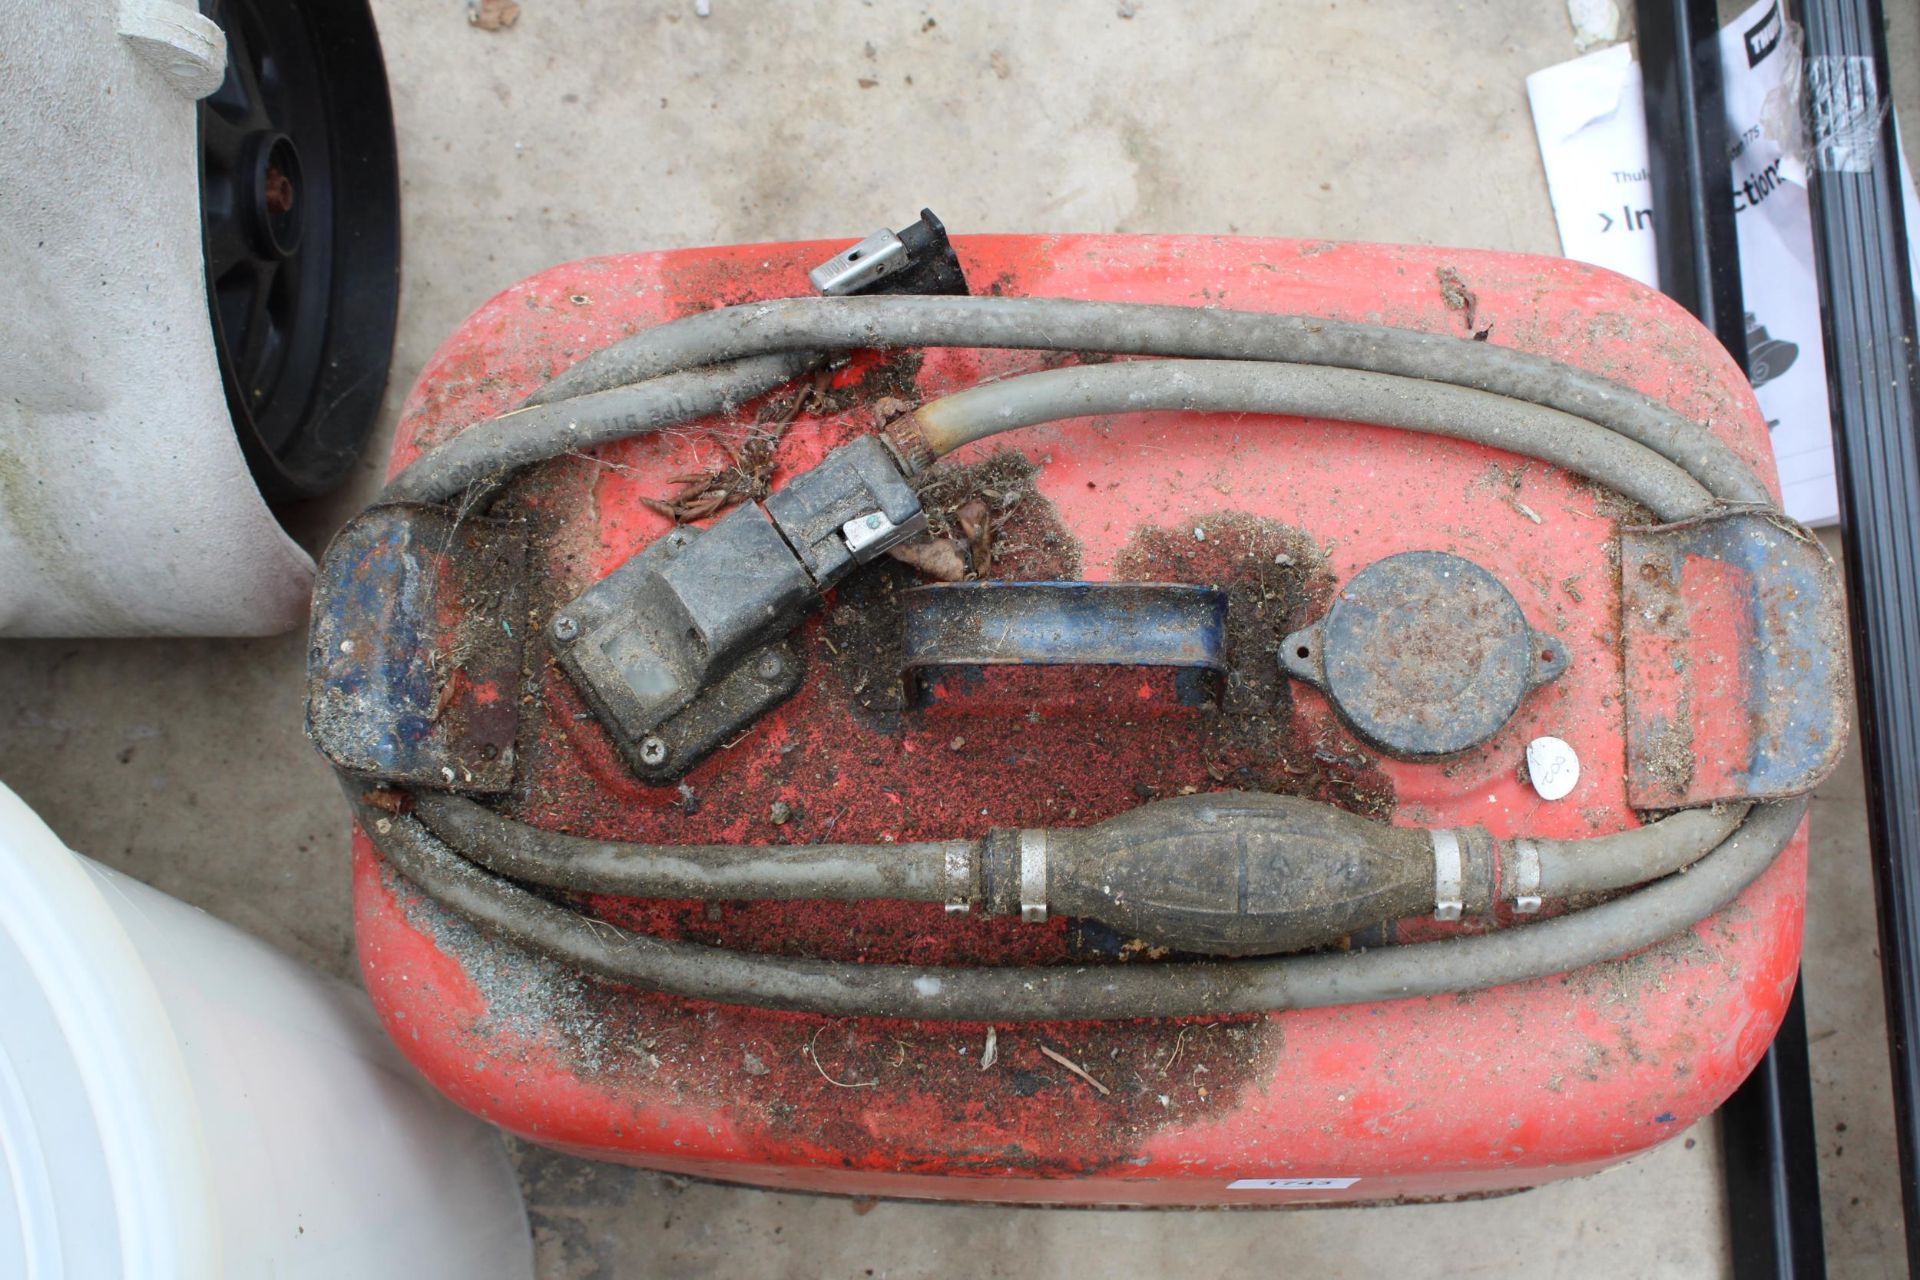 A VINTAGE AMAHA FUEL CAN WITH MANUAL PUMP - Image 2 of 2